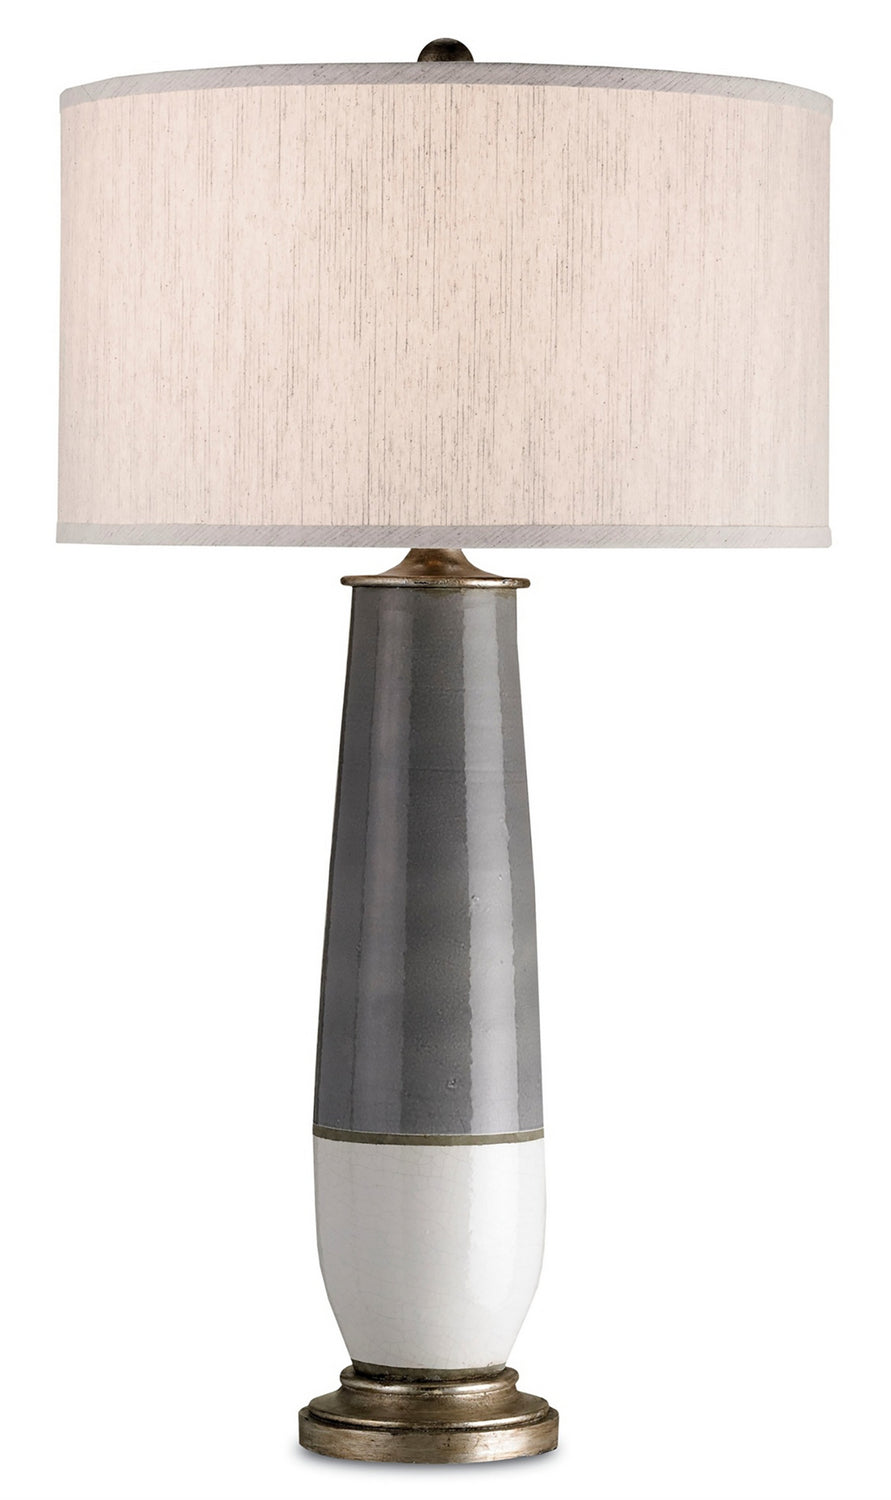 One Light Table Lamp from the Urbino collection in Pyrite Bronze/Gray/White Crackle finish